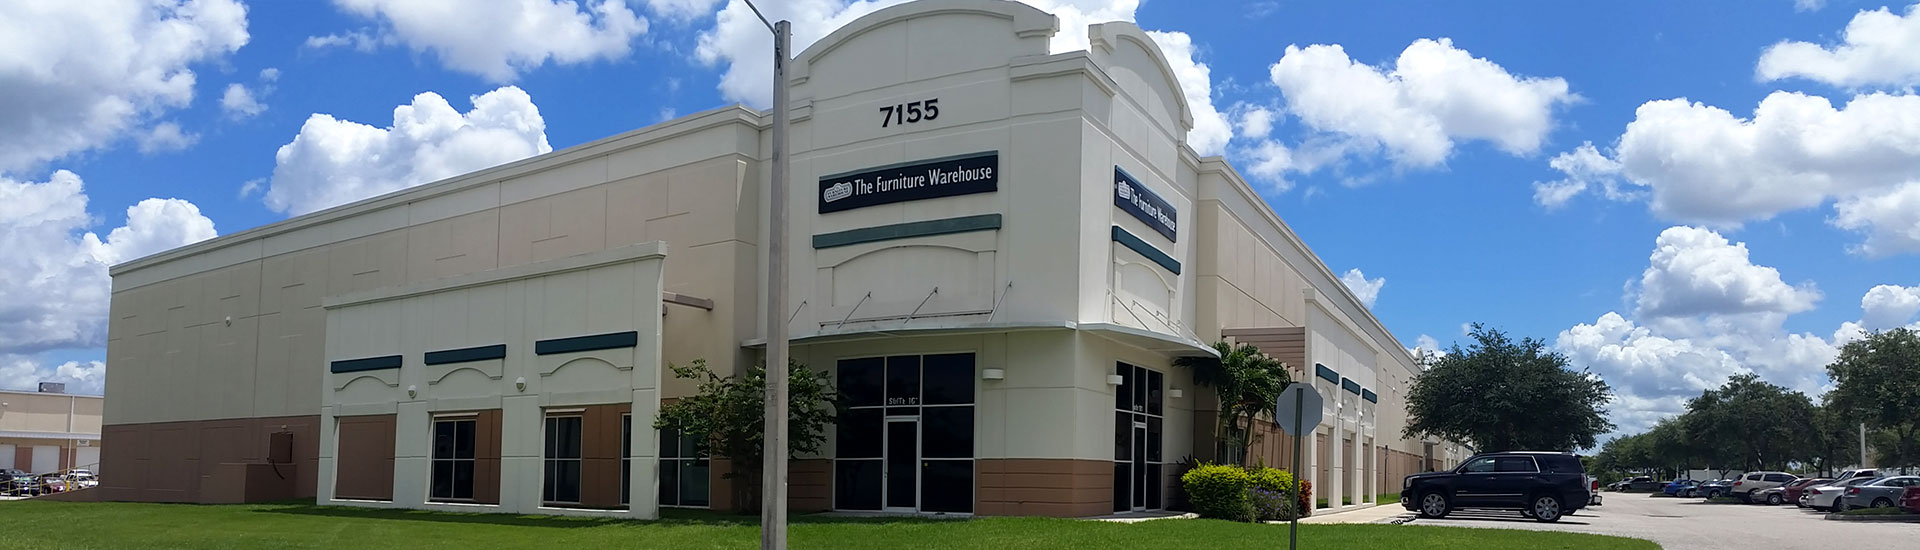 The Furniture Warehouse - Corporate Office and Pickup Location